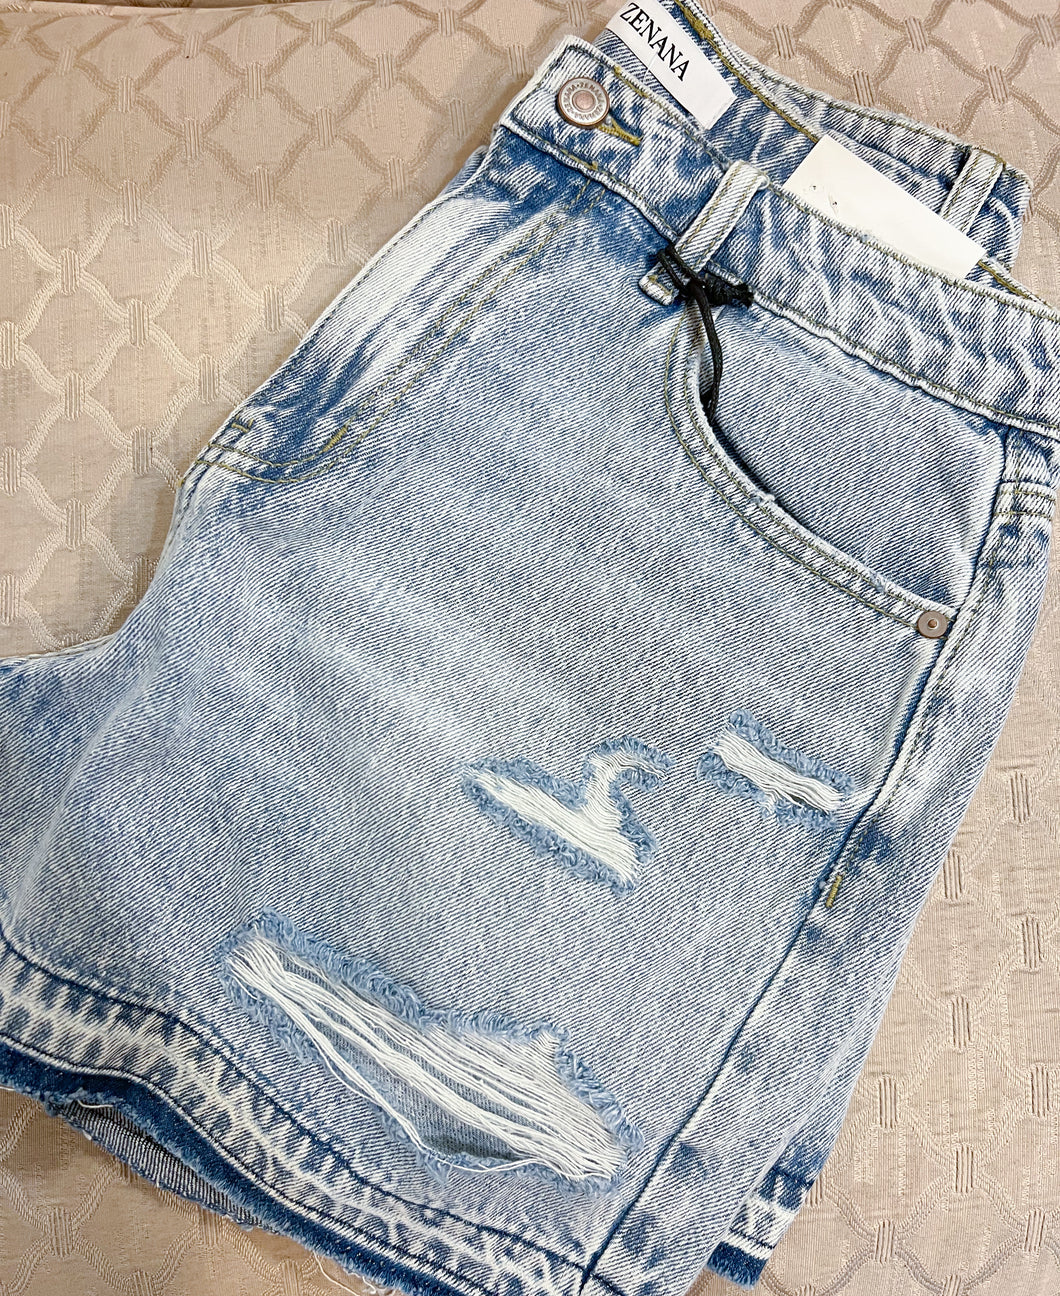 Light Washed Distressed Shorts